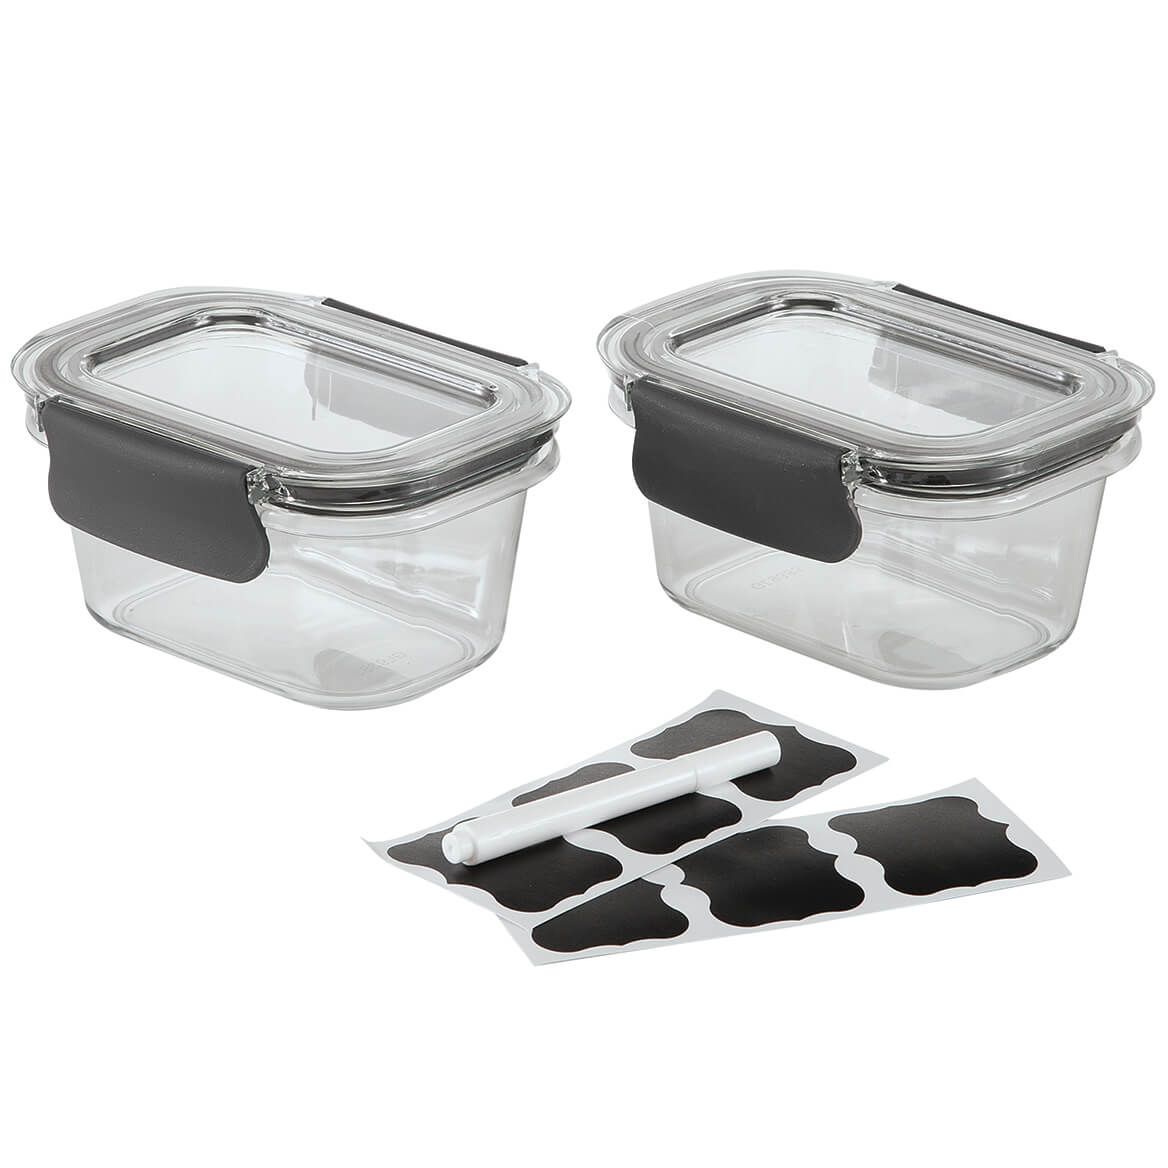 Chef's Own Small Airtight Containers - Miles Kimball